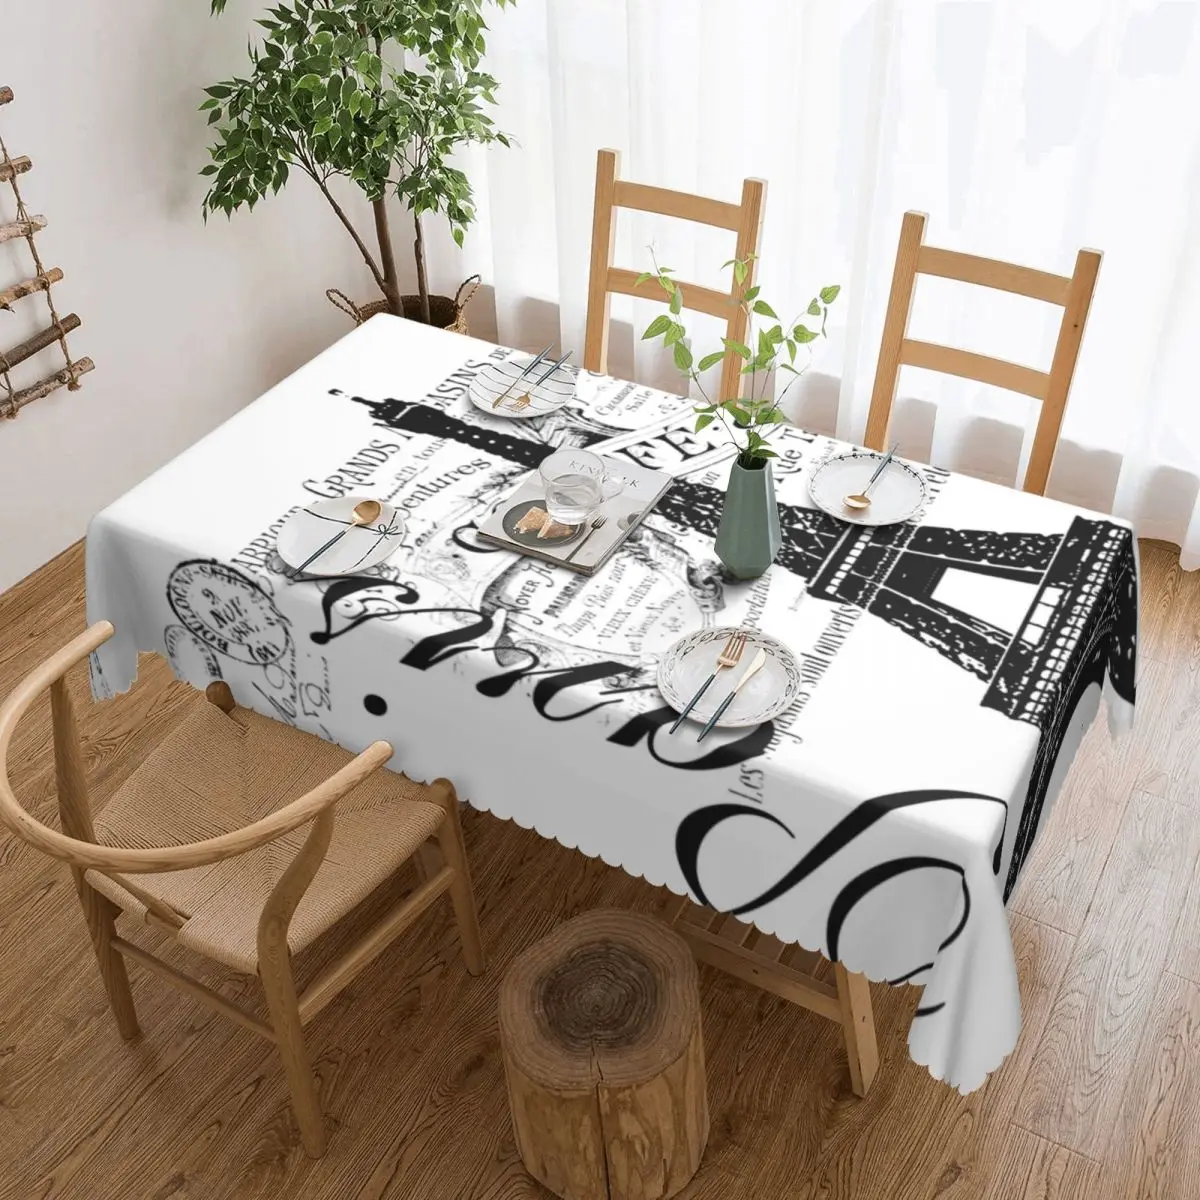 

Rectangular Waterproof Oil-Proof Vintage Eiffel Tower Tablecloth Table Covers 40"-44" Fit Romantic France Paris Table Cloth